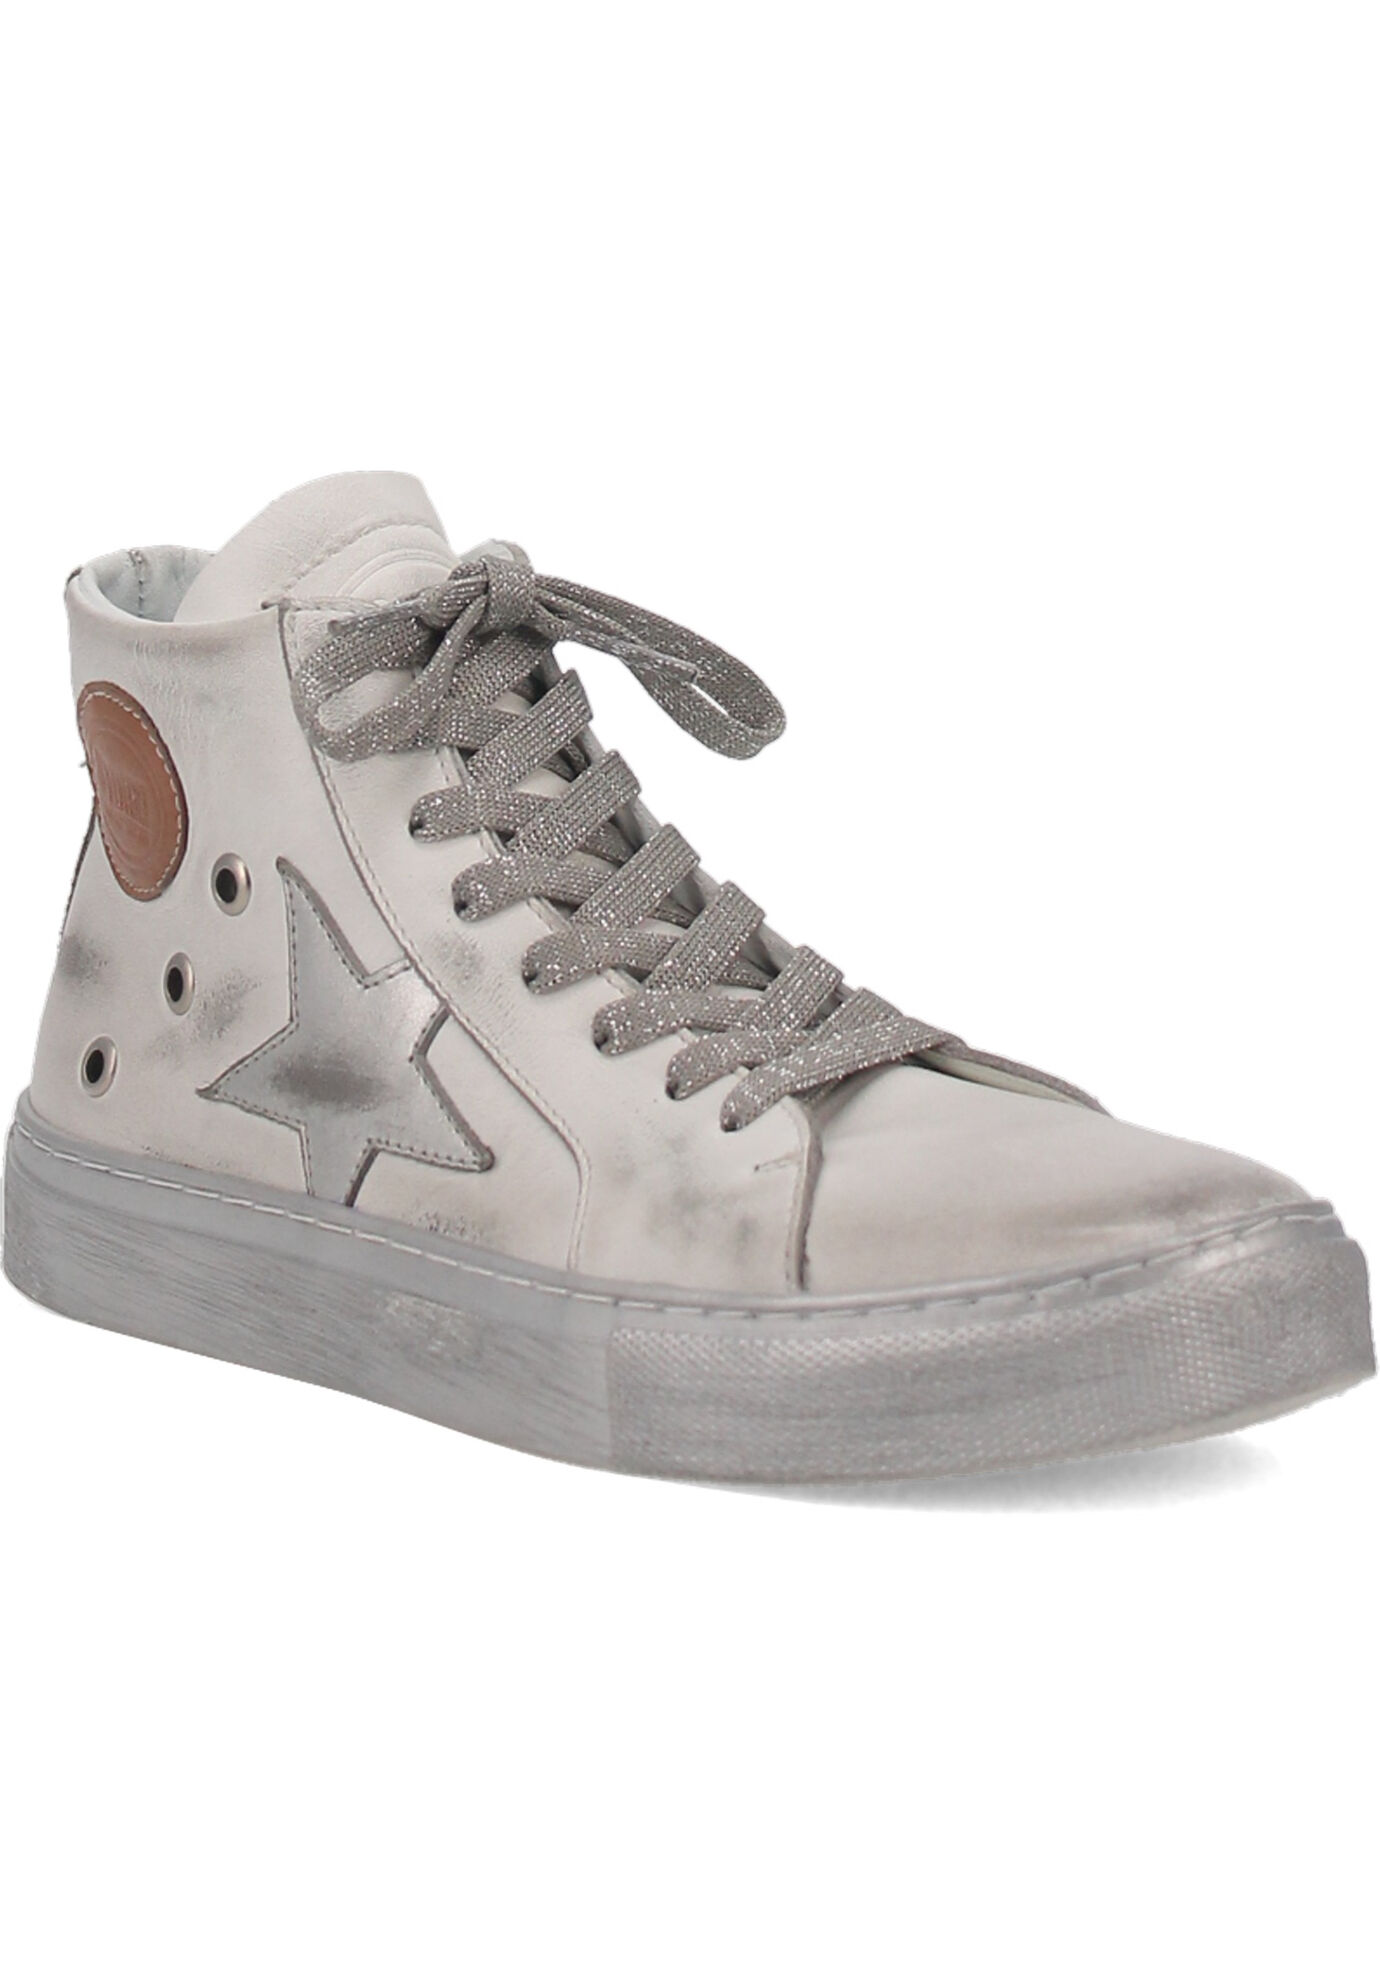 Women's Animal House Sneaker by Dingo in White Silver (Size 7 1/2 M)